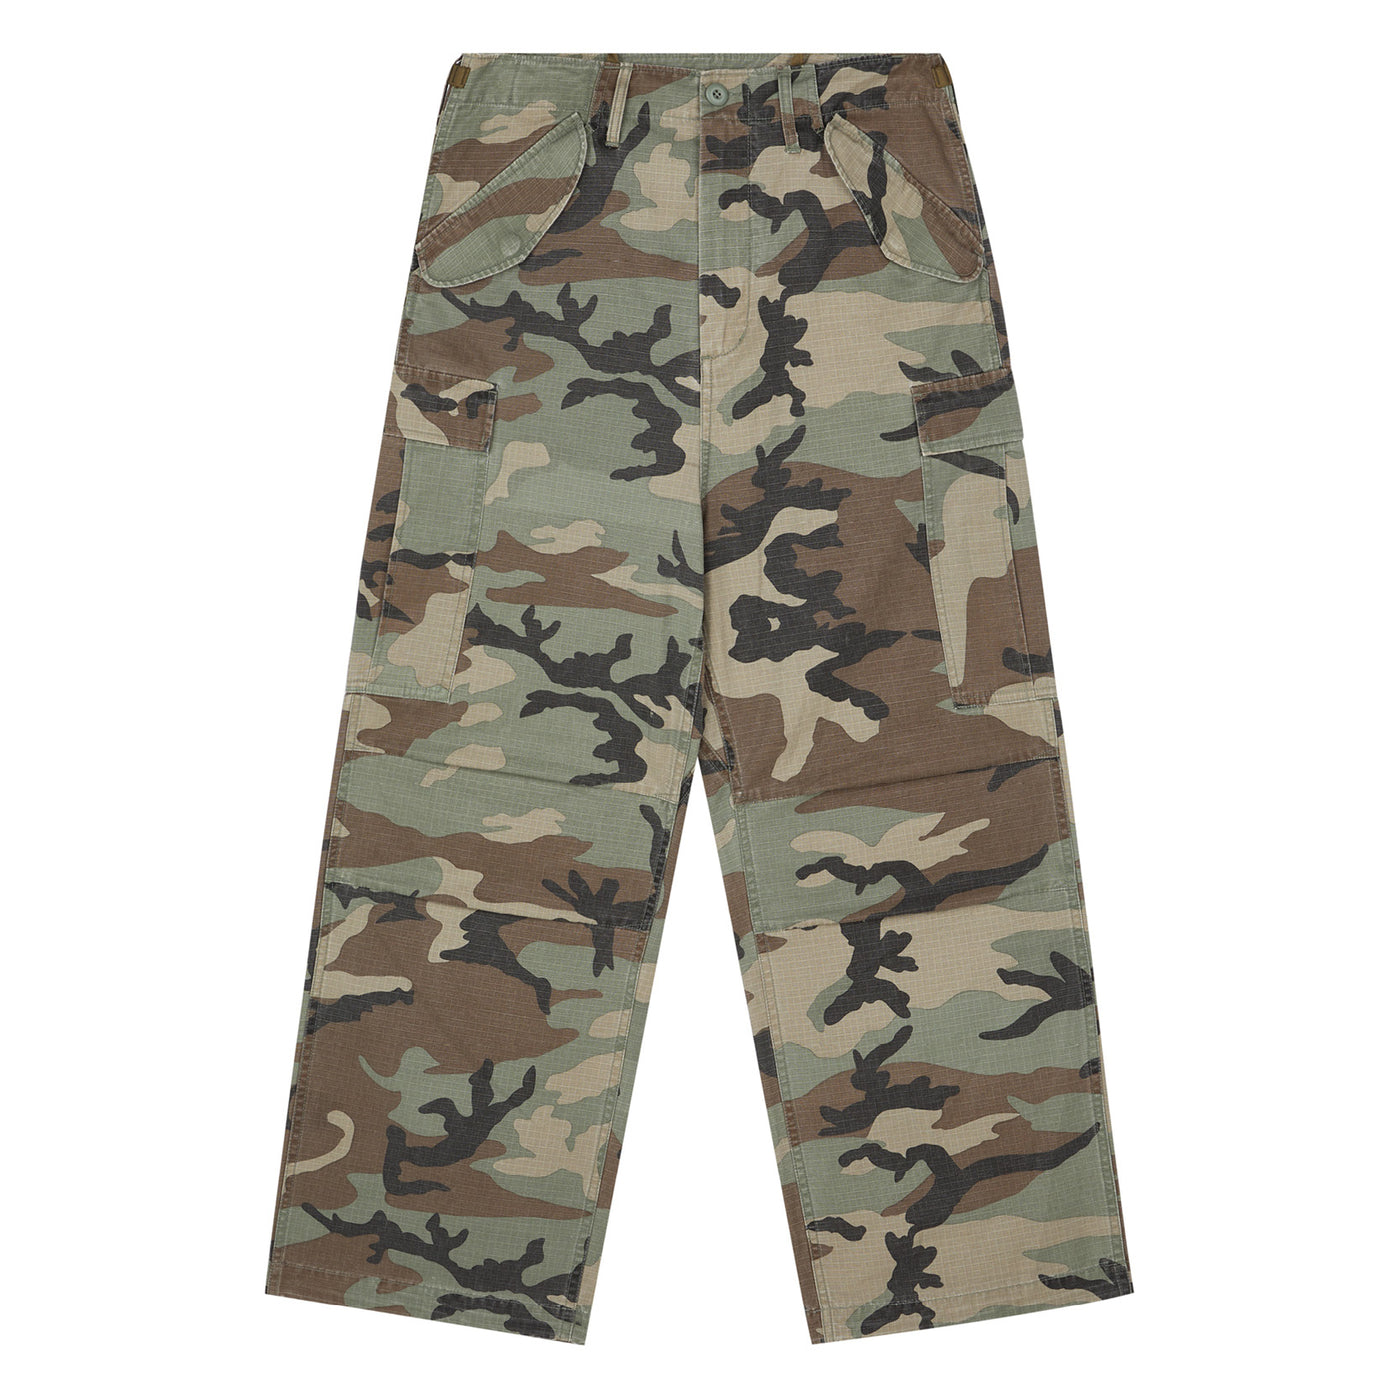 Wassup House Camouflage Old M51 Work Pants